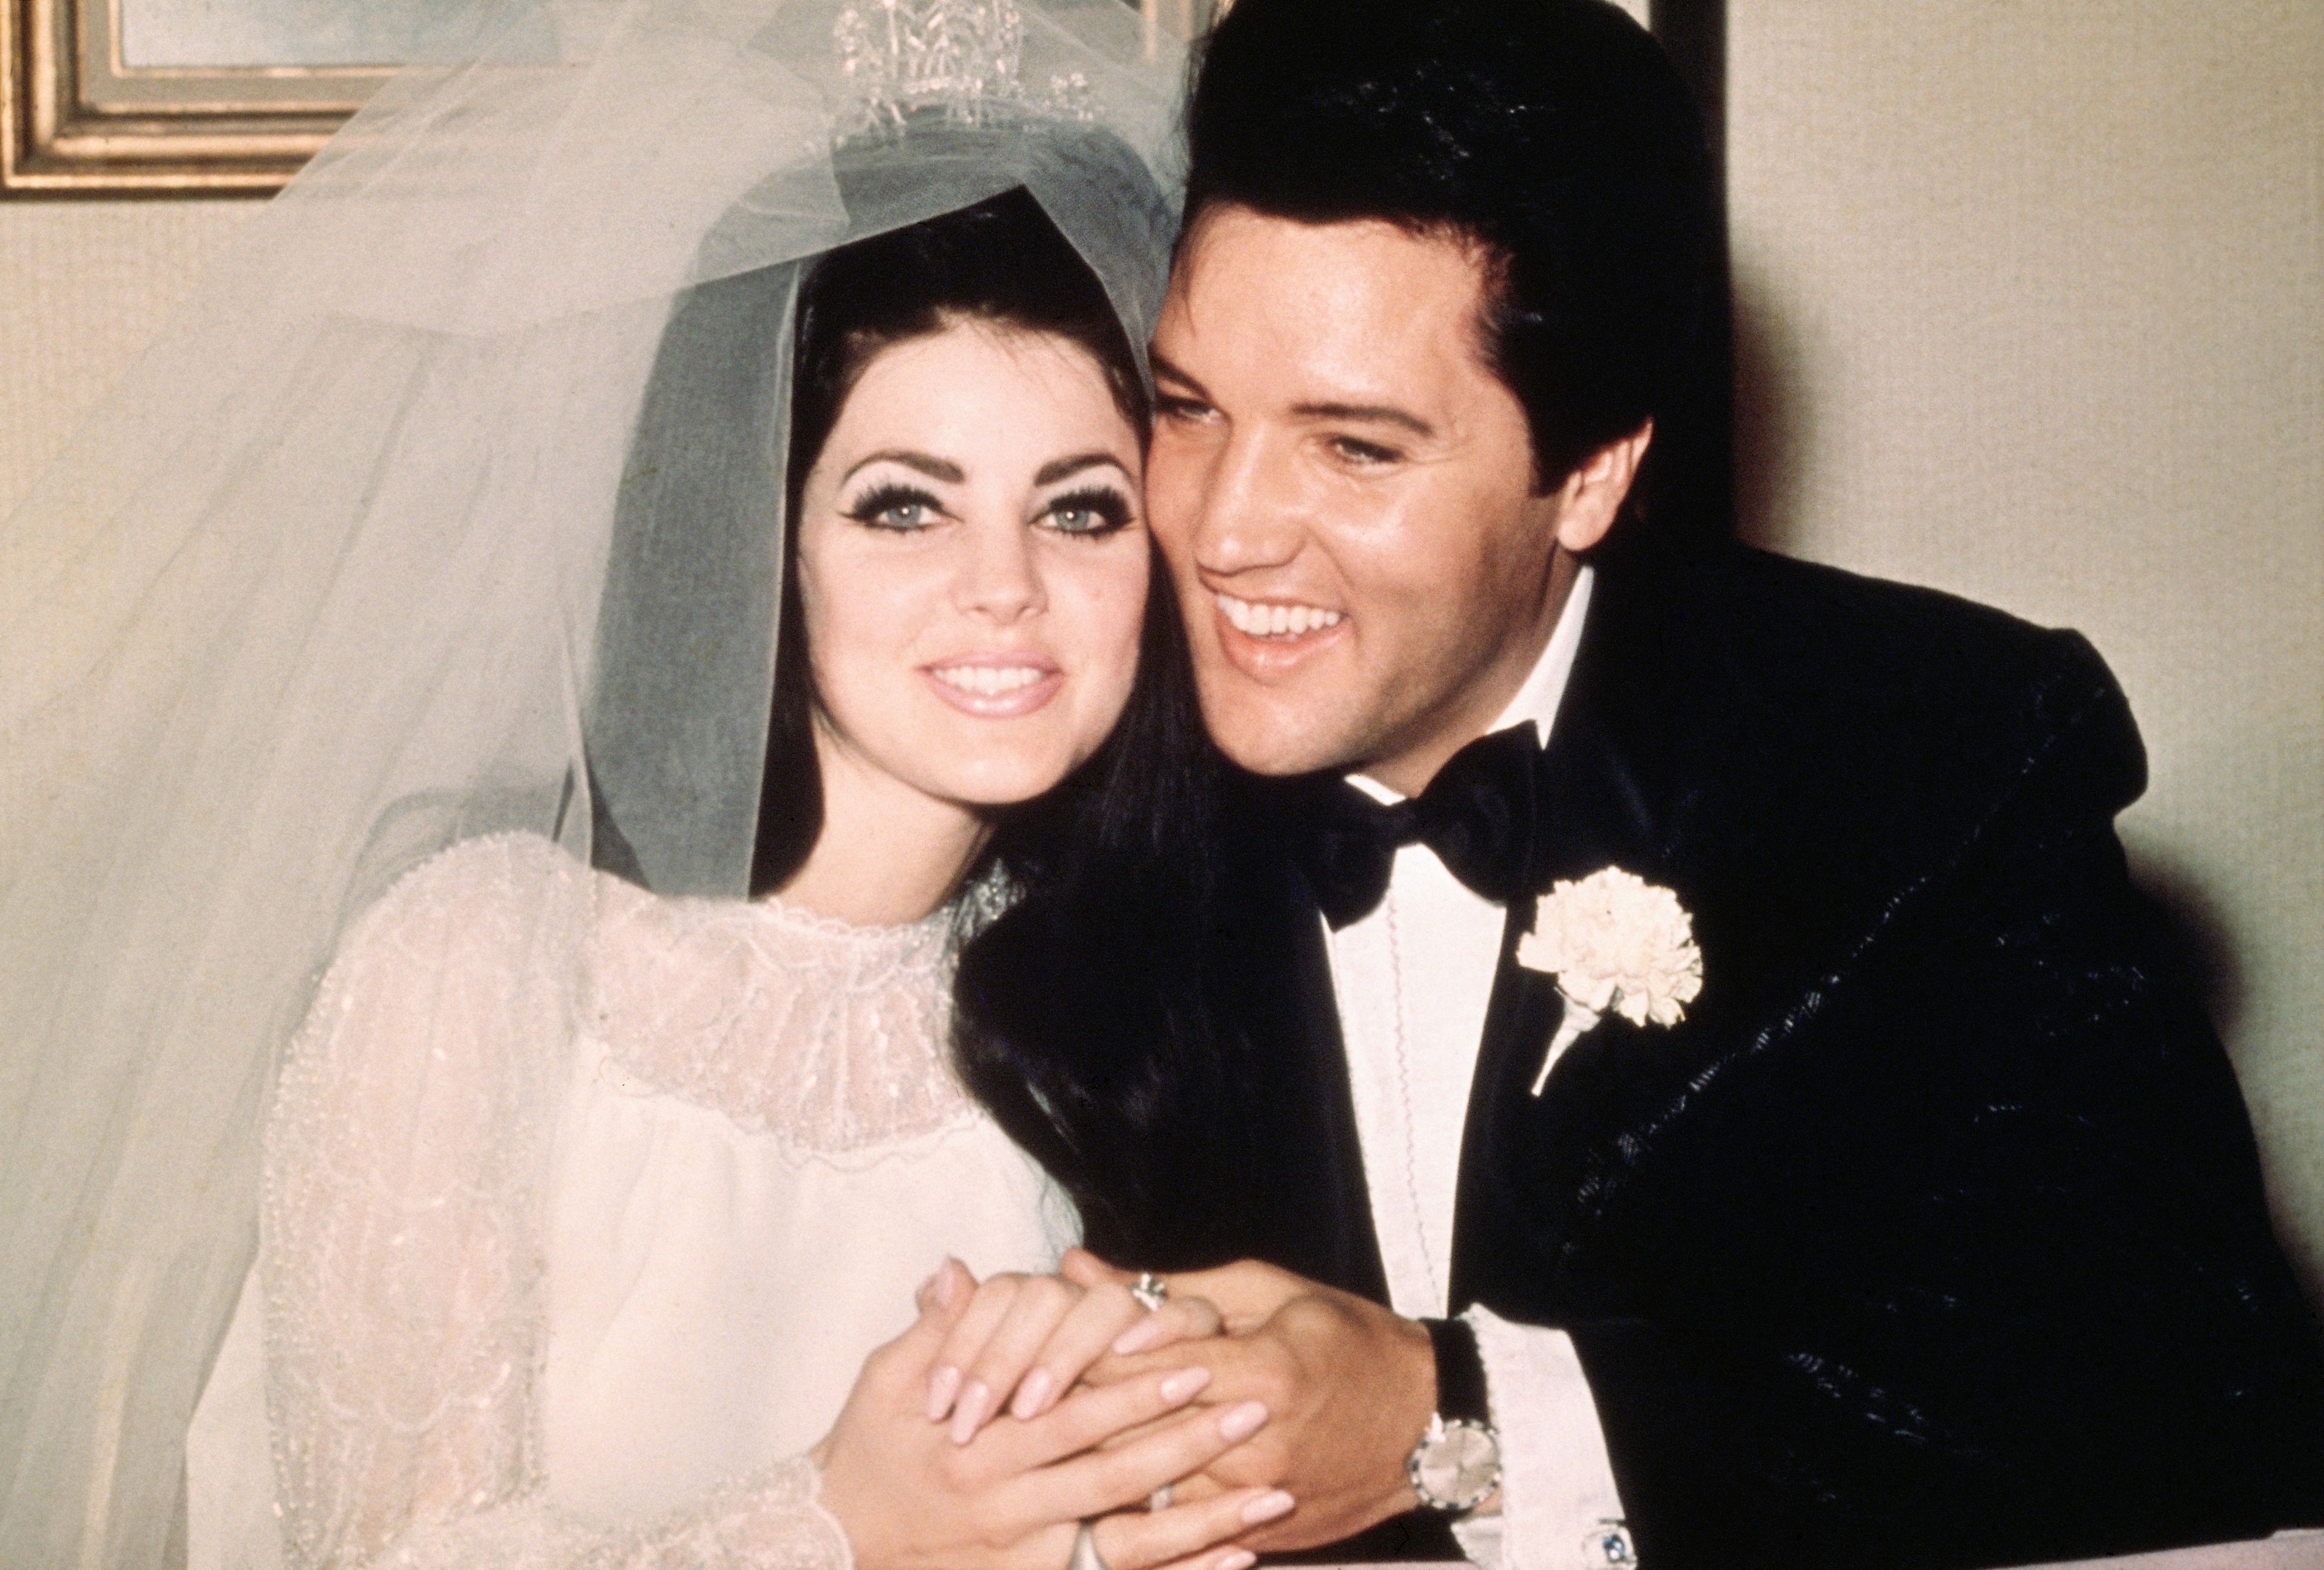 Elvis Presley with Priscilla Presley following their wedding on May 1, 1967 | Photo: Getty Images